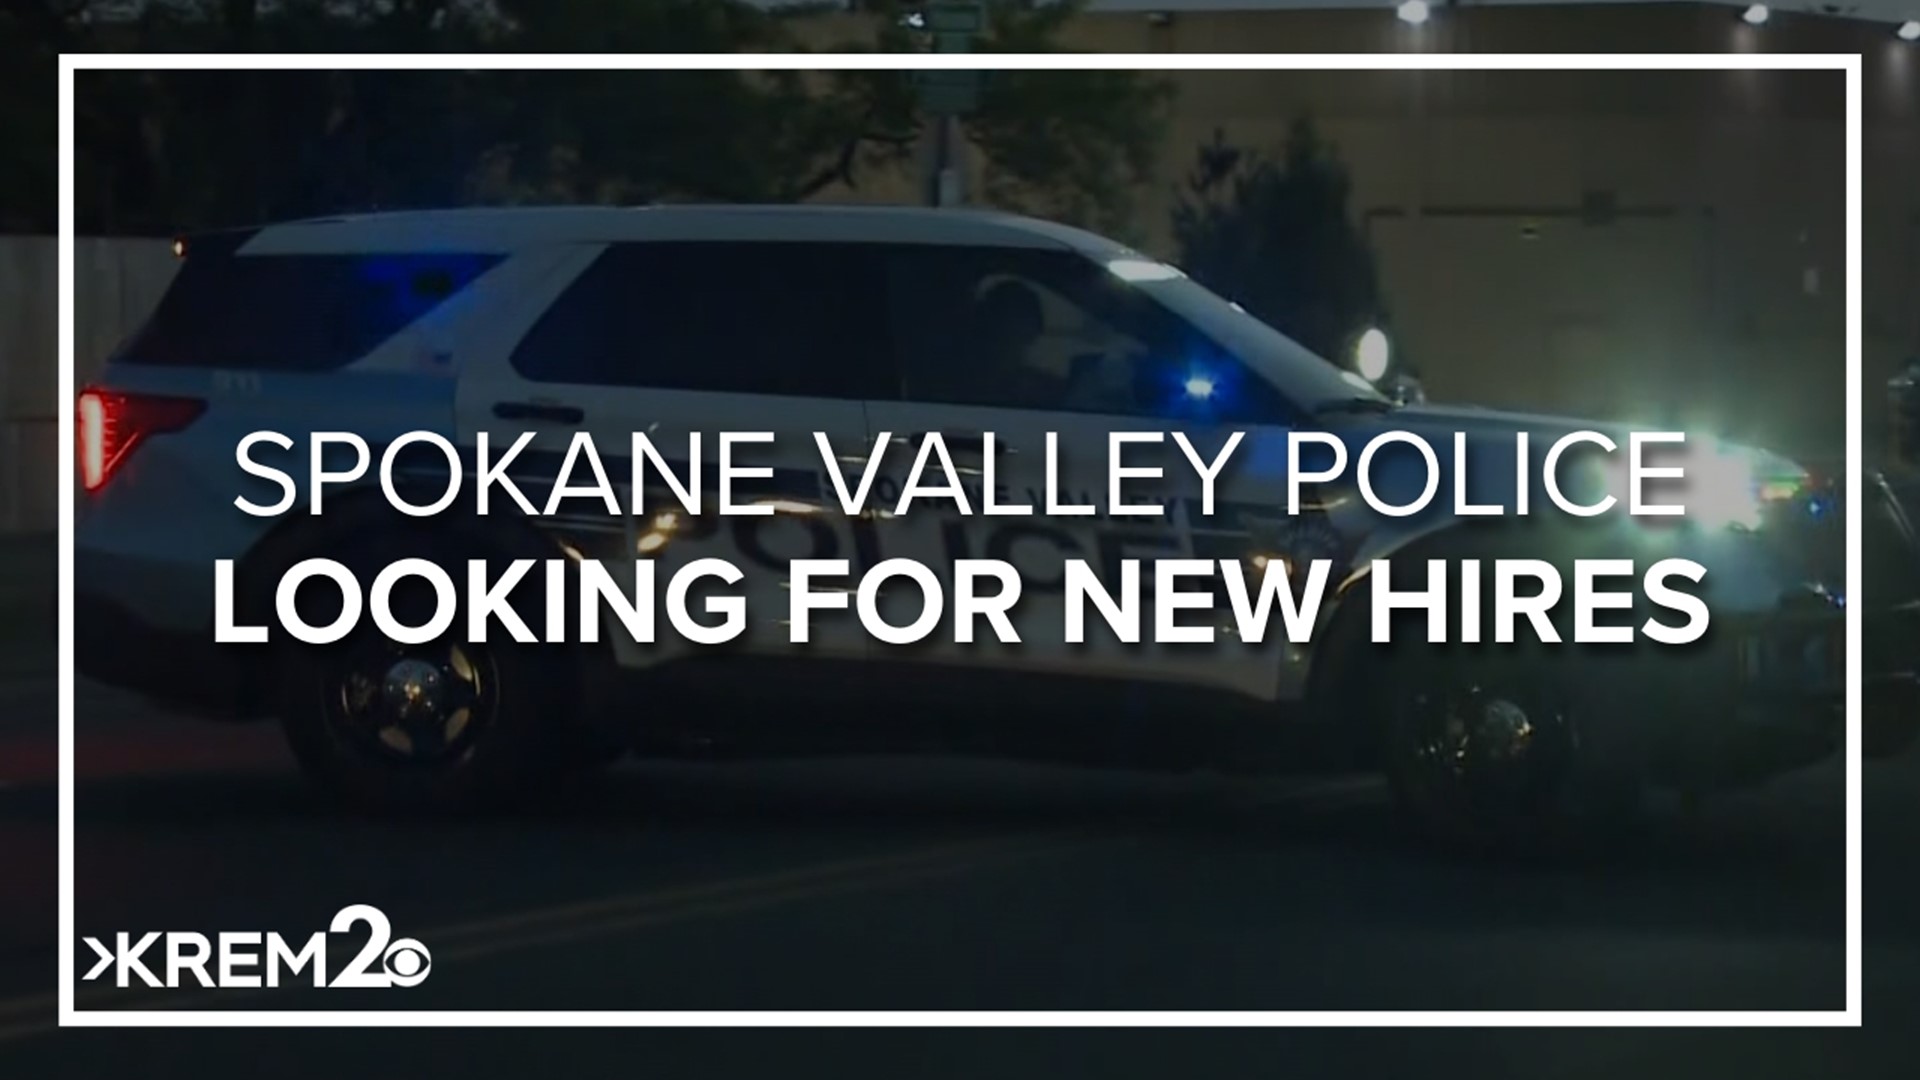 SVPD is looking for new hires as the city continues growing.